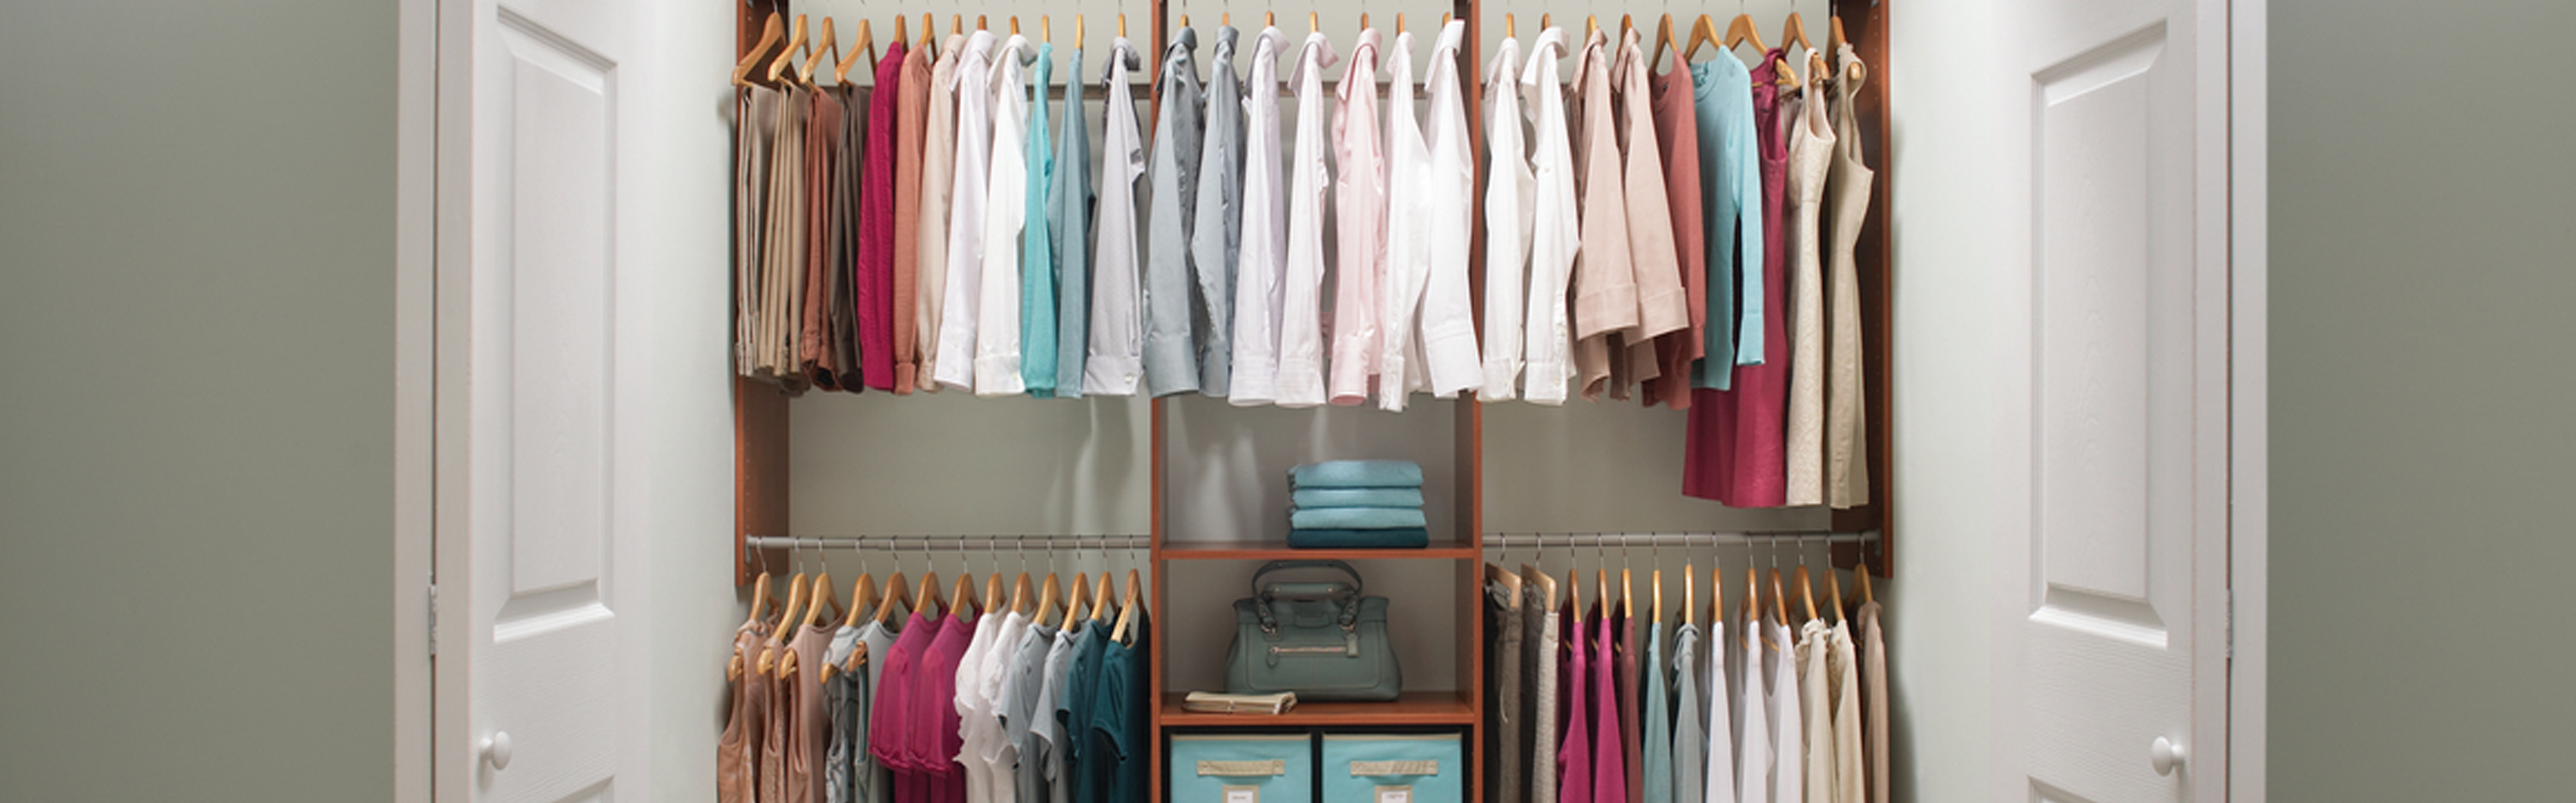 THE TOP TRENDS FOR ORGANIZATION AND STORAGE IN 2015 CLOSET